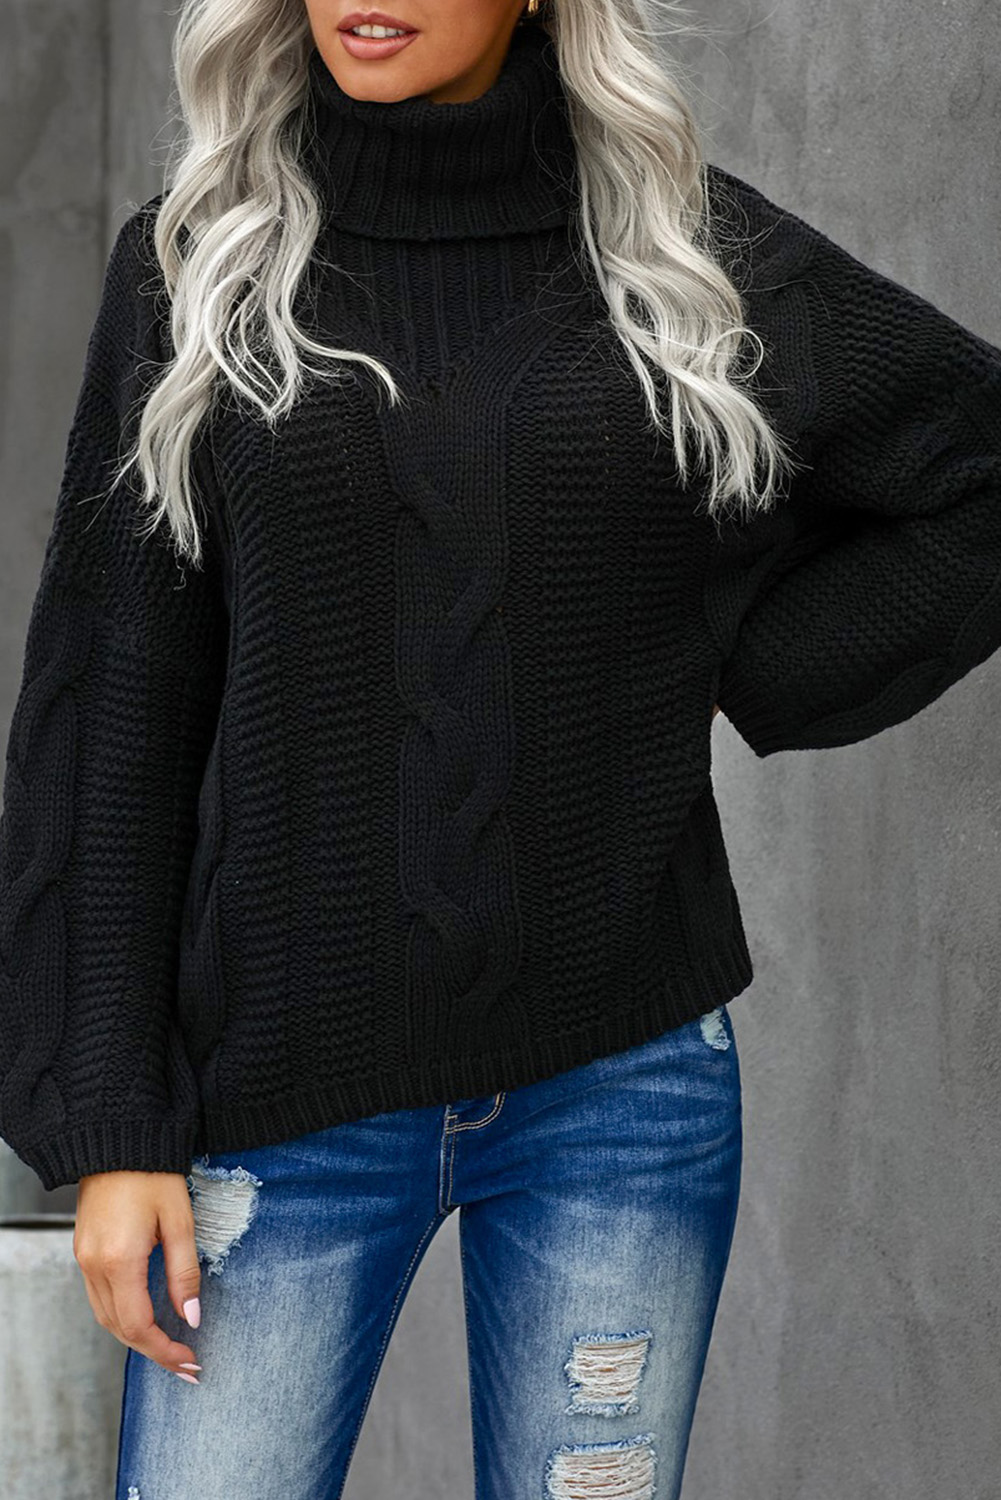 US$ 13.78 Drop-shipping Black Oversize Turtleneck Textured Sweater for ...